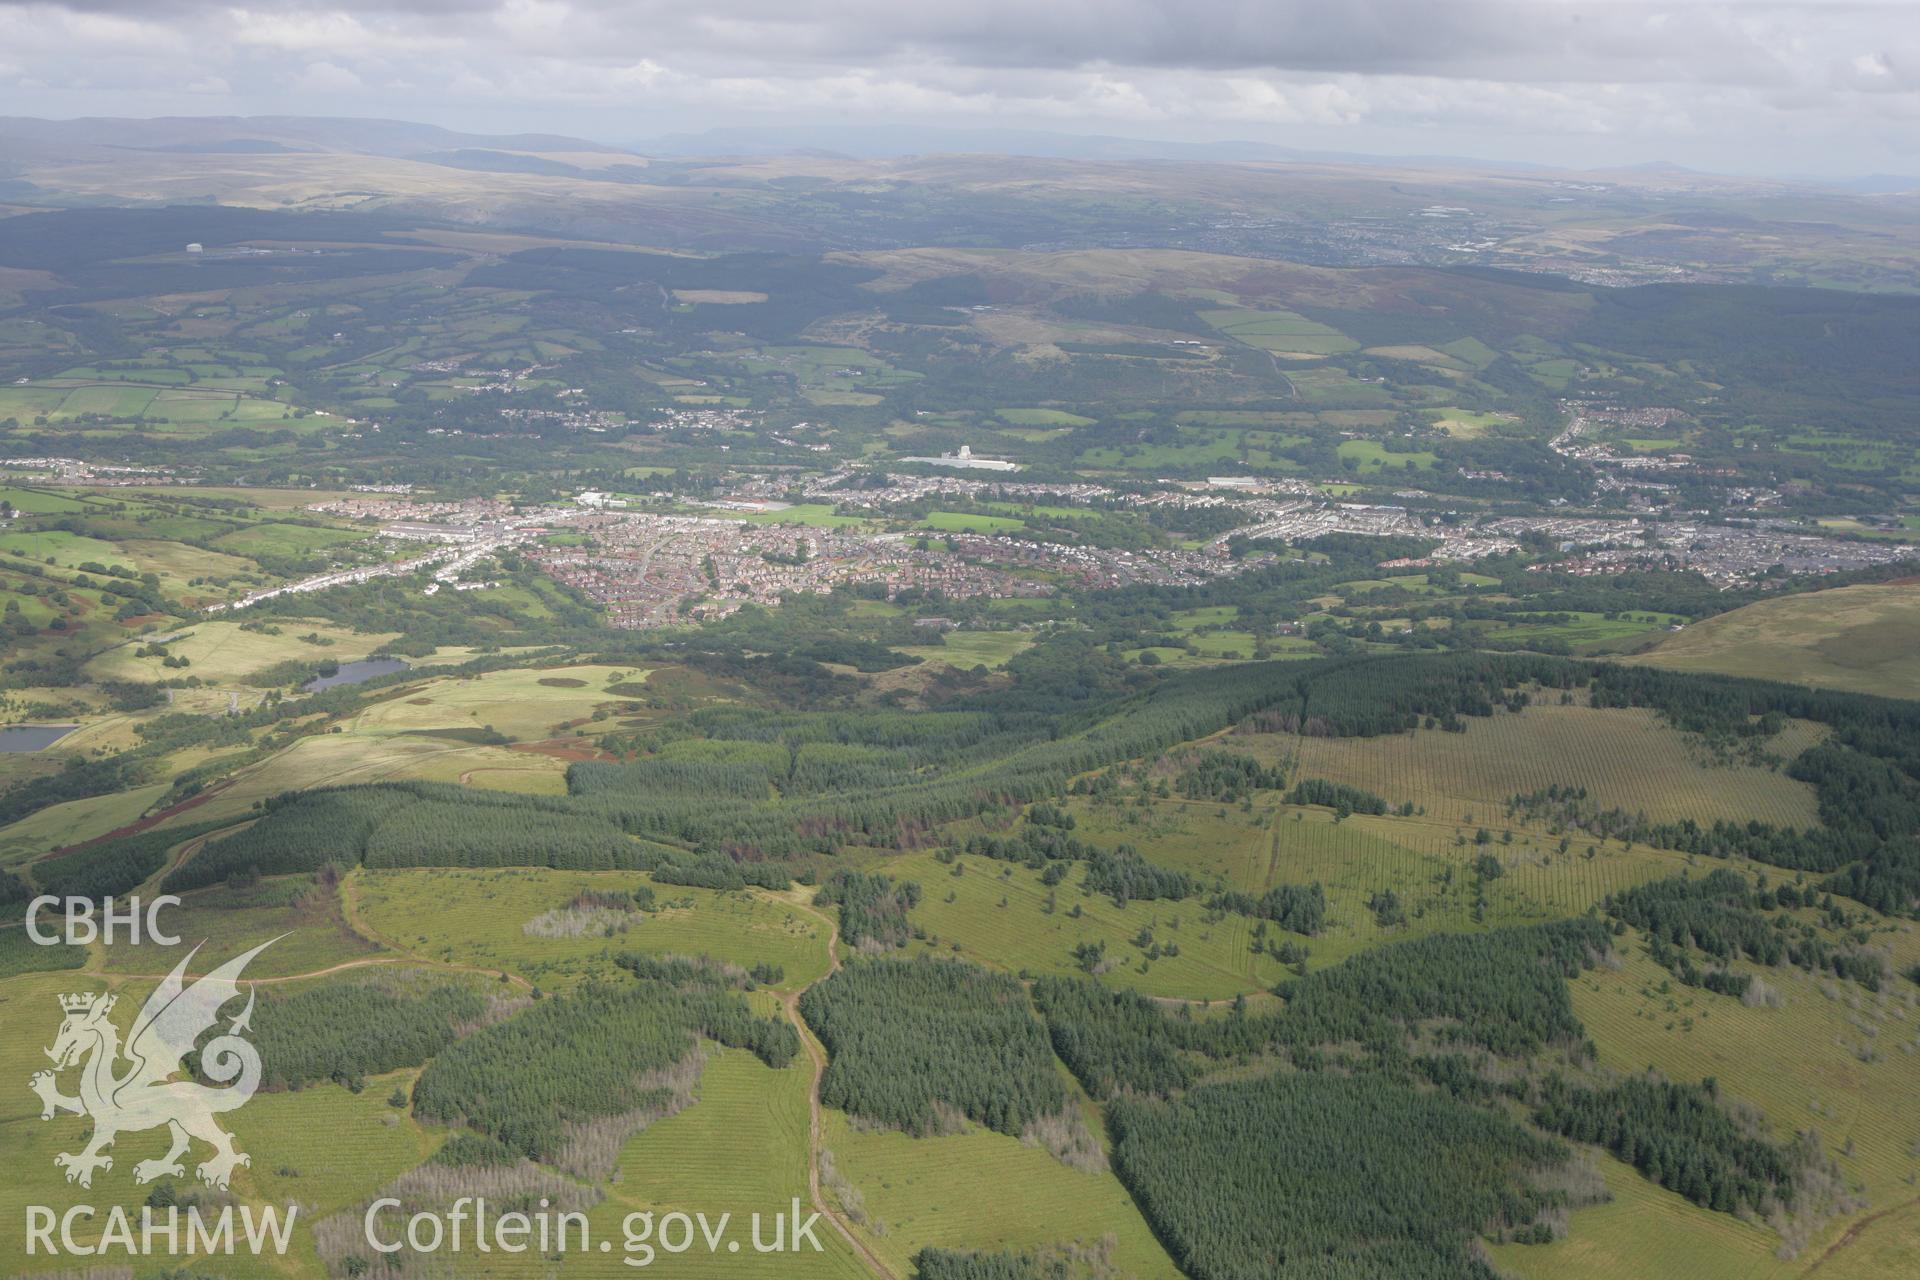 RCAHMW colour oblique photograph of landscape looking north-east towards Aberdare. Taken by Toby Driver on 12/09/2008.